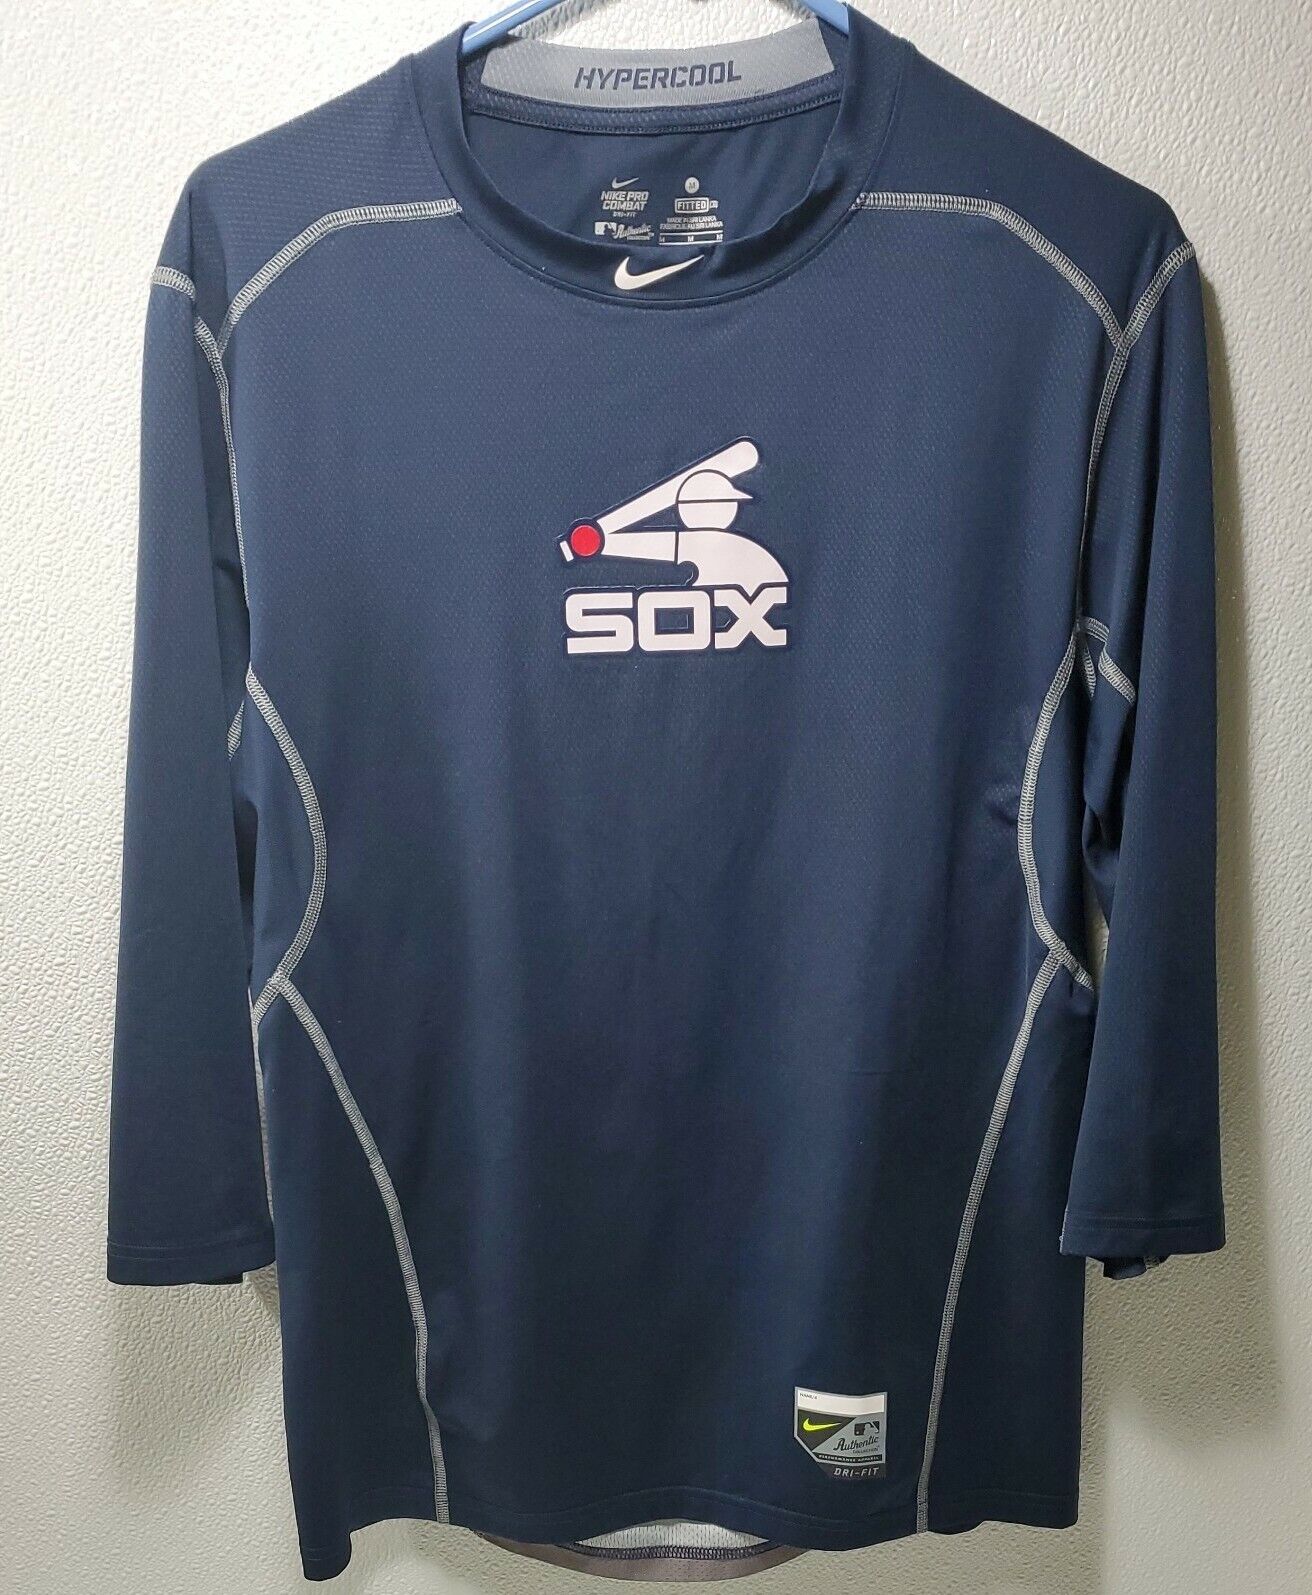 at retfærdiggøre fange skive NIKE White Sox Pro Combat Hypercool Shirt Mens Sz M Compression Dri Fit  Vented for Sale - SimHQ.com